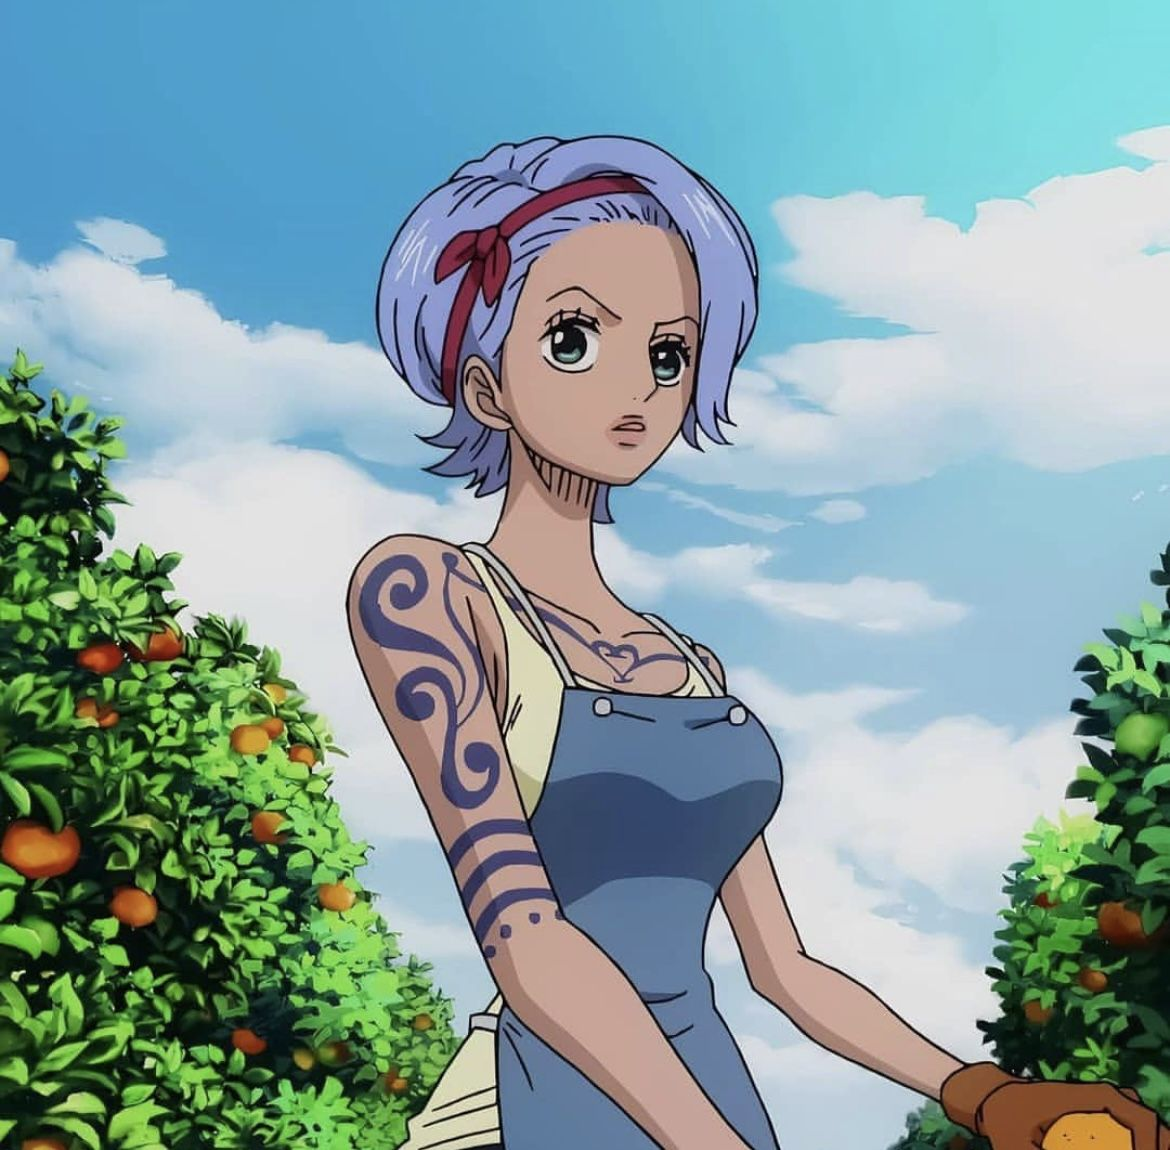 Nojiko in One Piece. Still from the anime